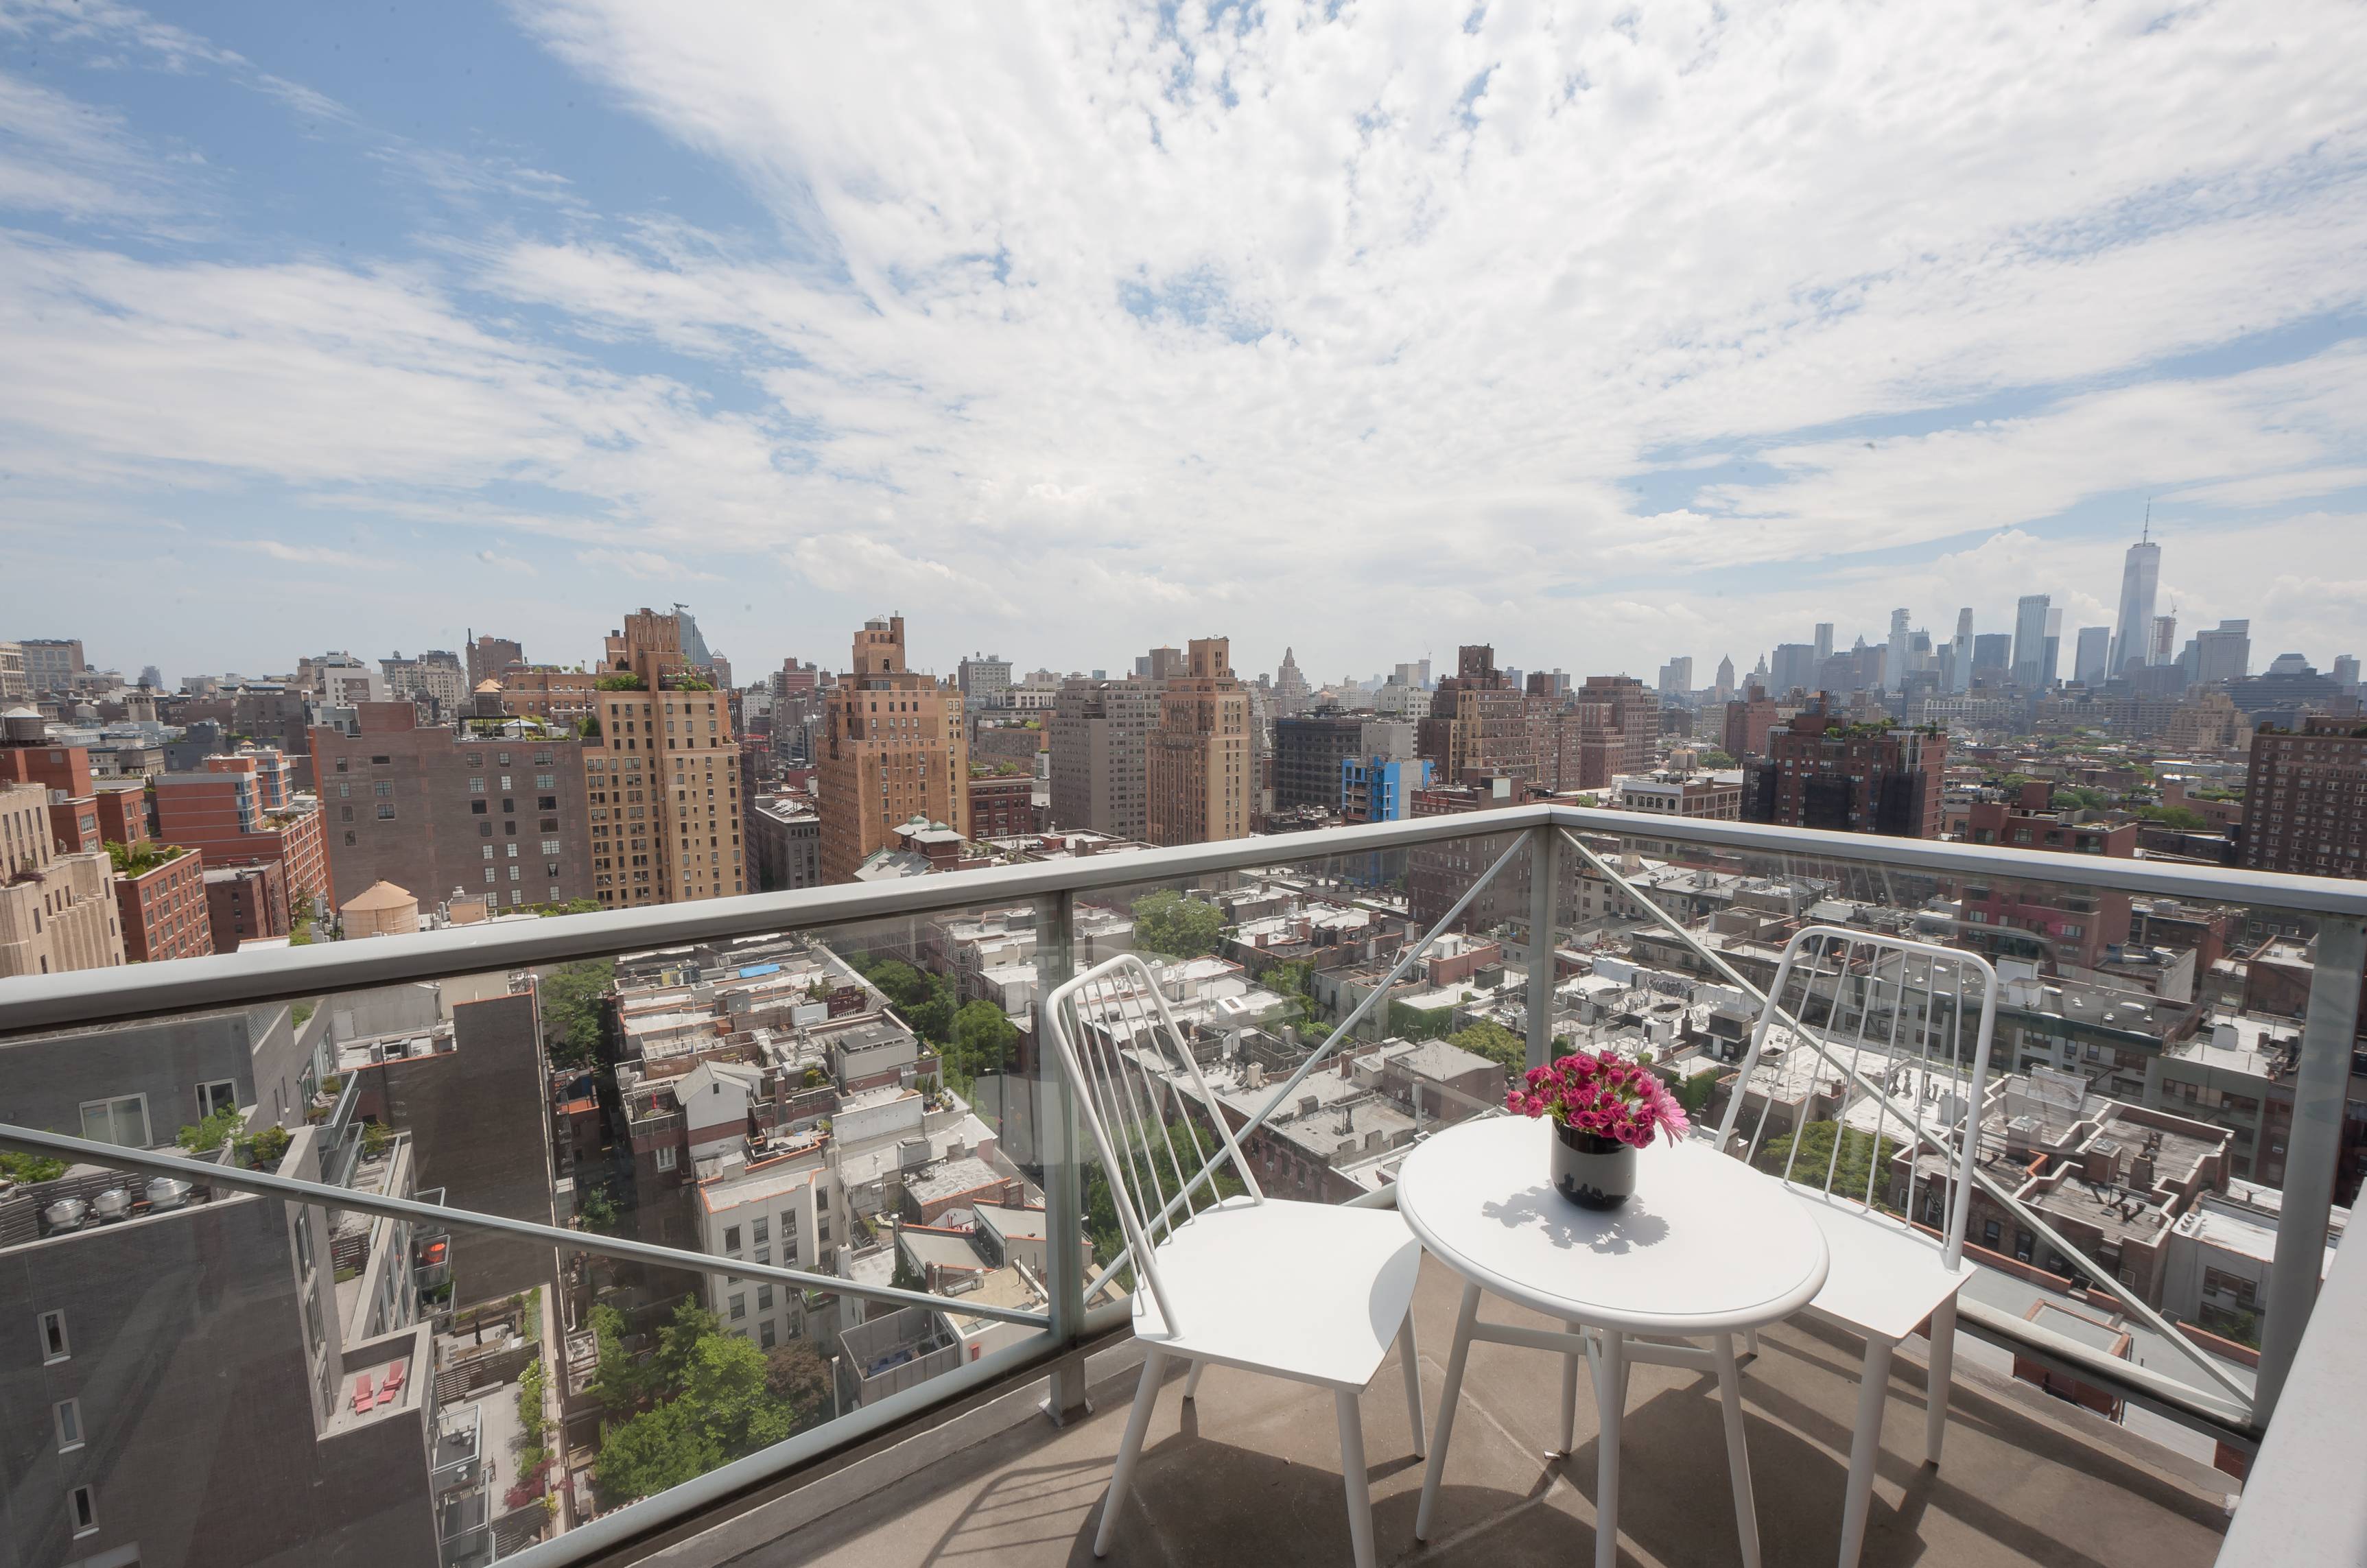 THE GRAND CHELSEA 270 WEST 17th ULTRA CHIC ONE BEDROOM PENTHOUSE WITH BALCONY & BRAND NEW DESIGNER RENOVATIONS